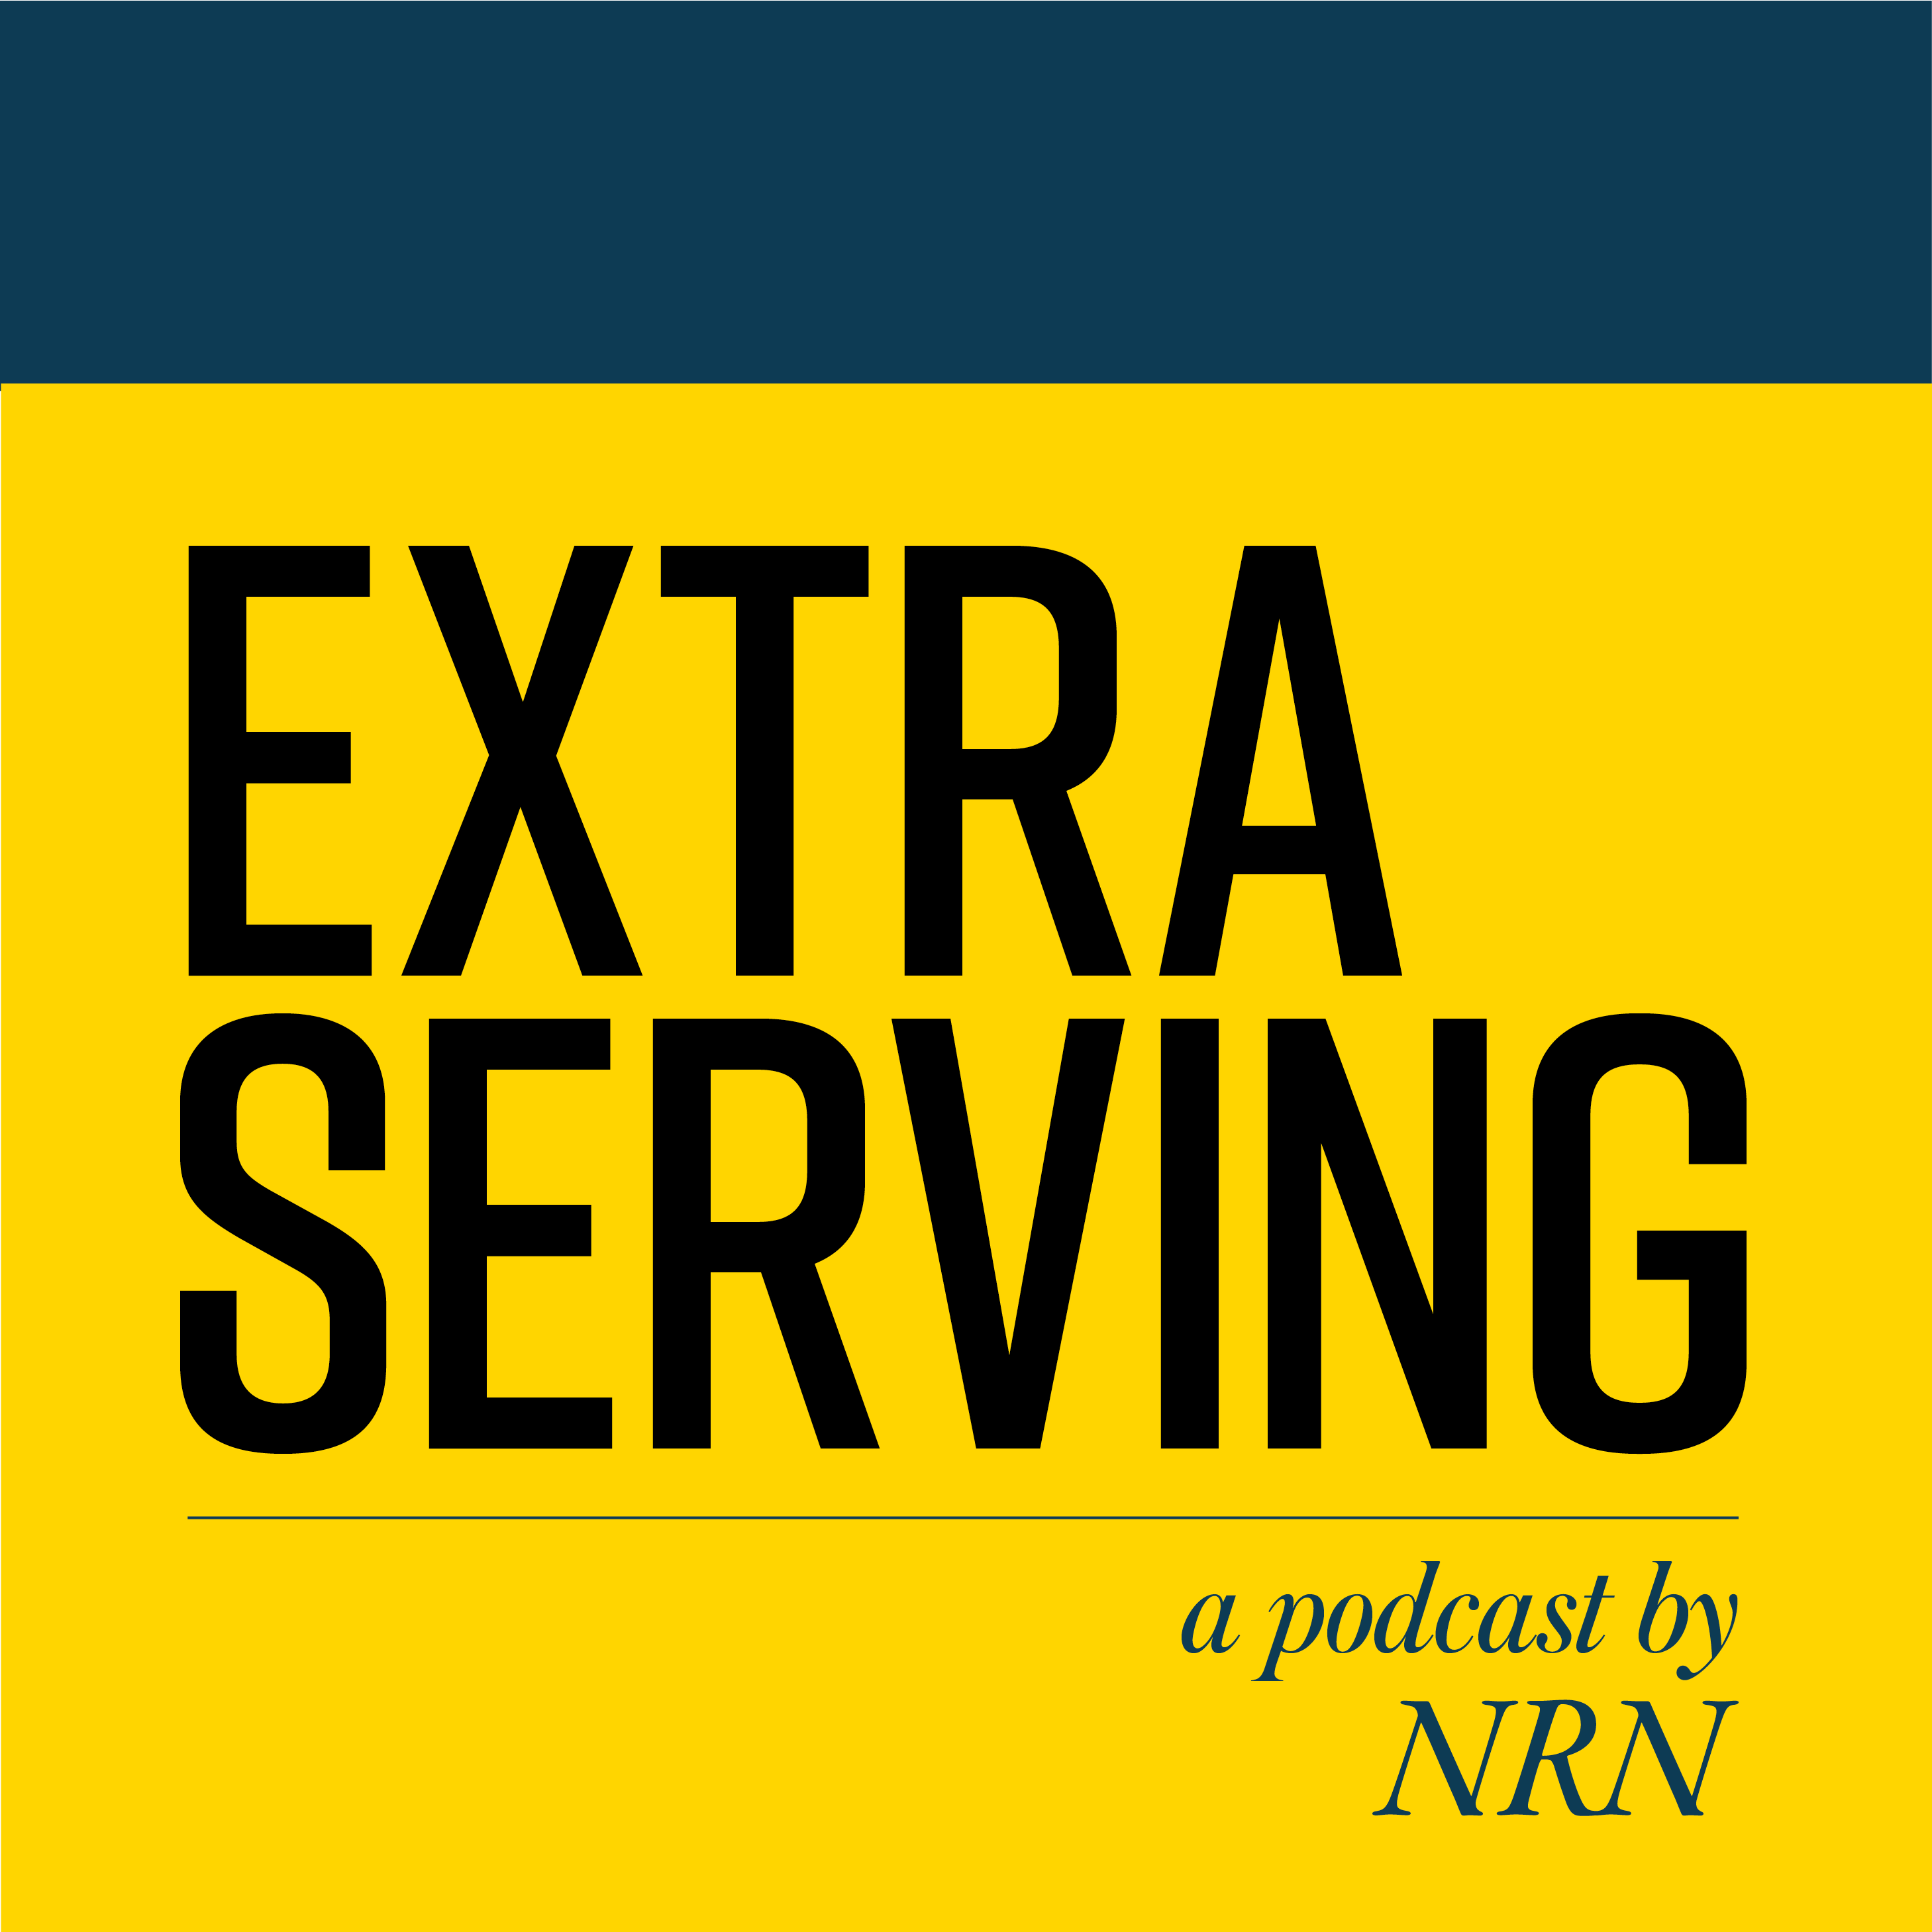 NRN editors discuss Chicago food, labor challenges, changing dayparts and the NRA show